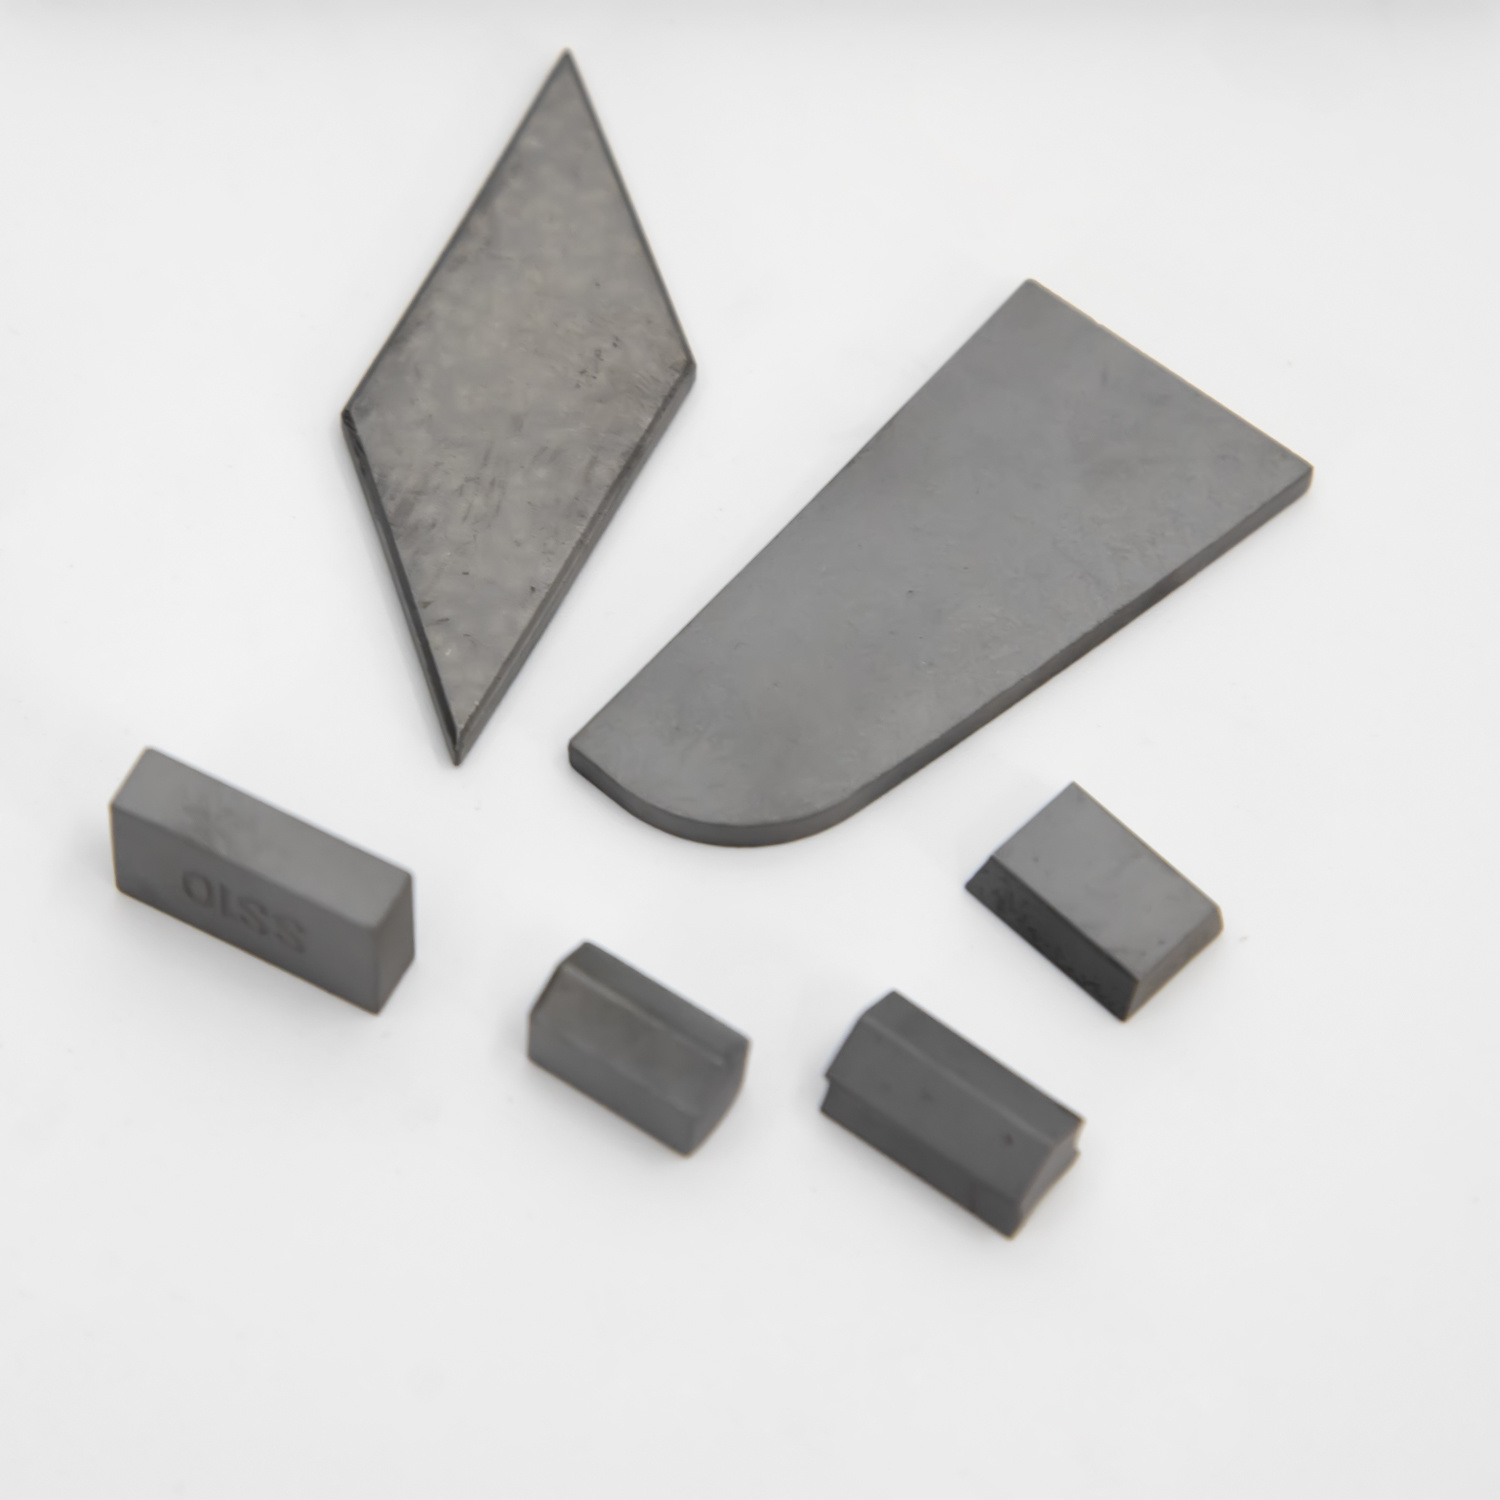 Is tungsten carbide the strongest metal?